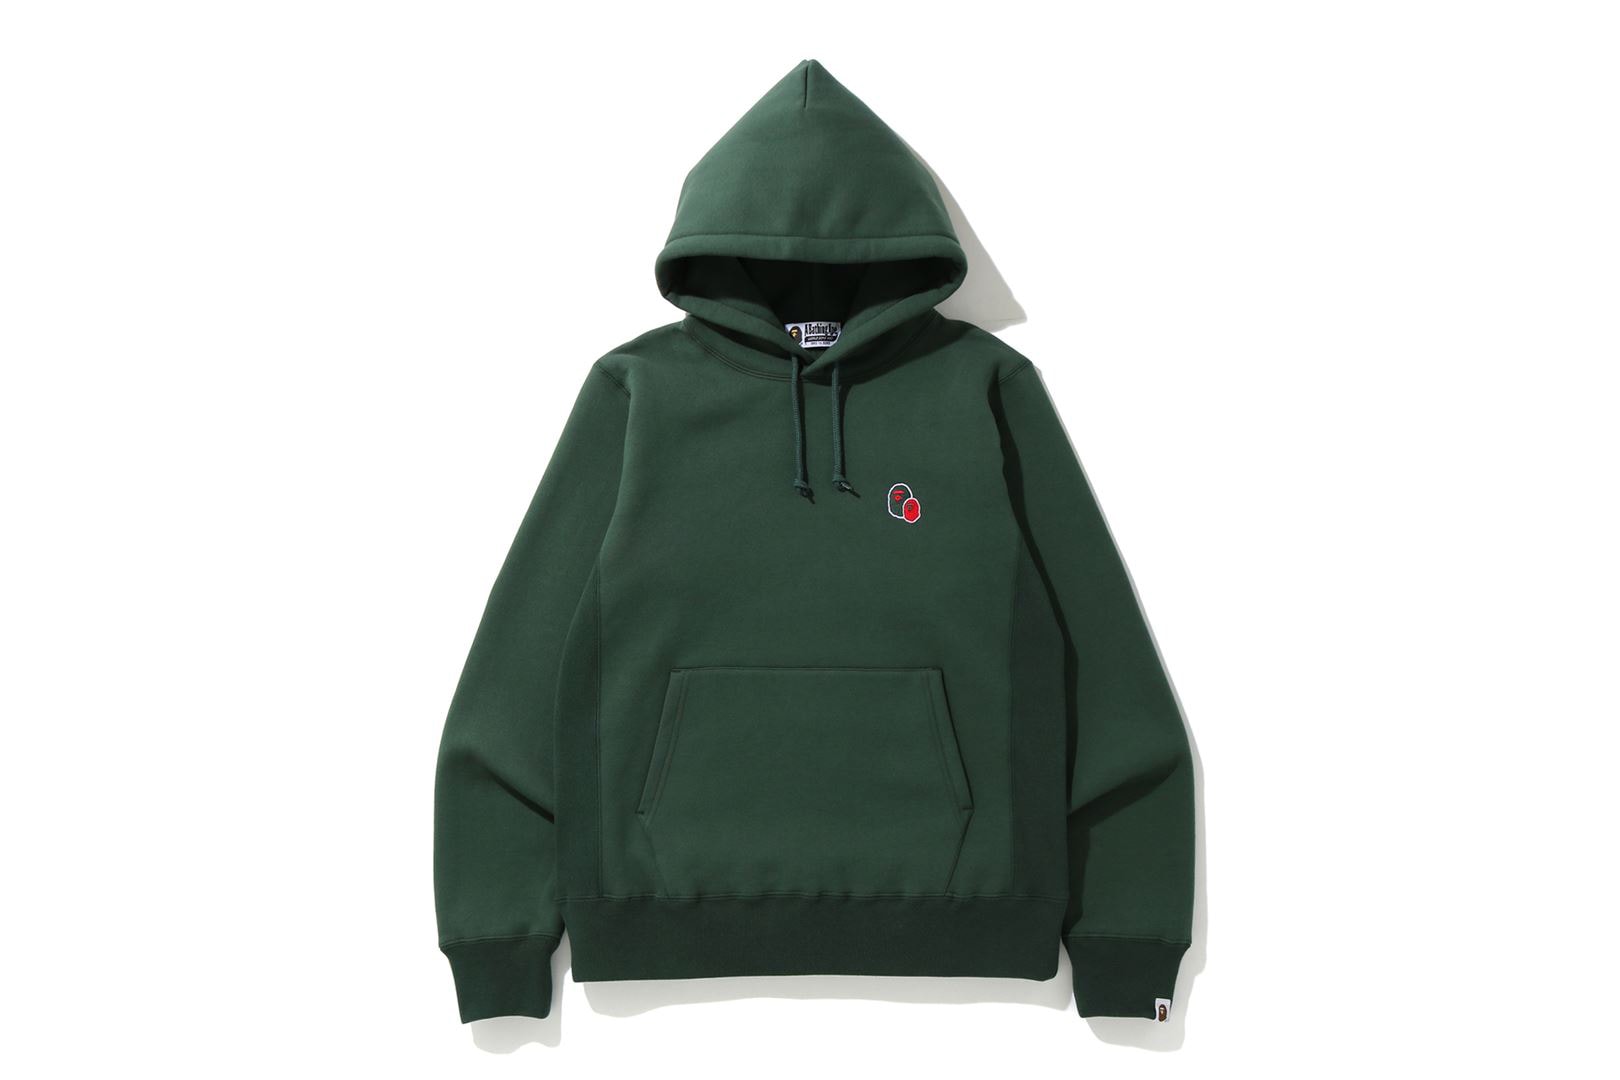 BAPE Christmas 2019 Collection a bathing ape t-shirts hoodies green red white baby milo x'mas stocking 